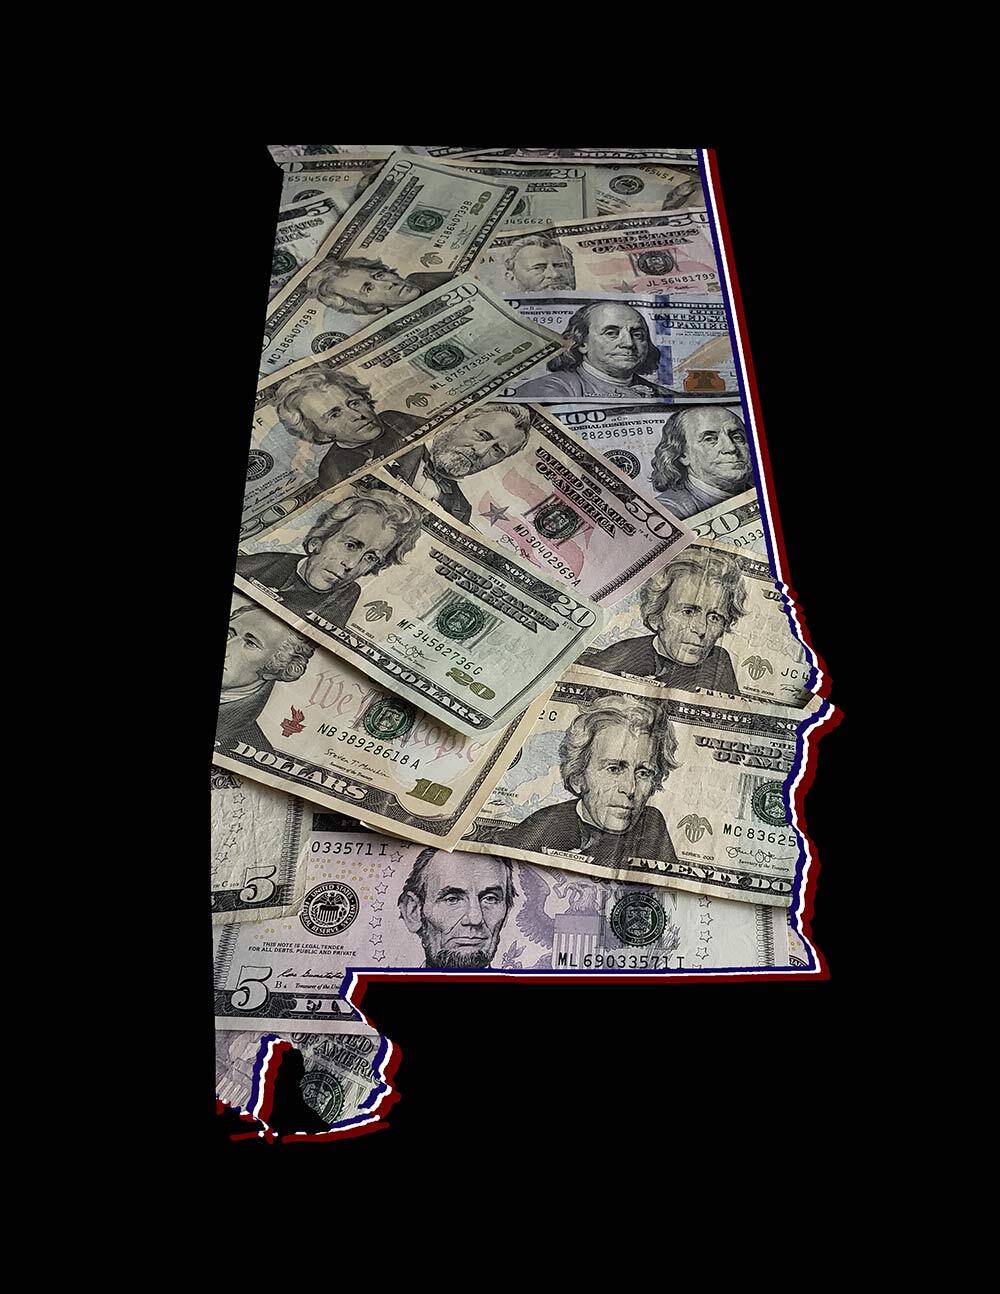 A First Time Borrower’s Guide to Alabama Payday Loans